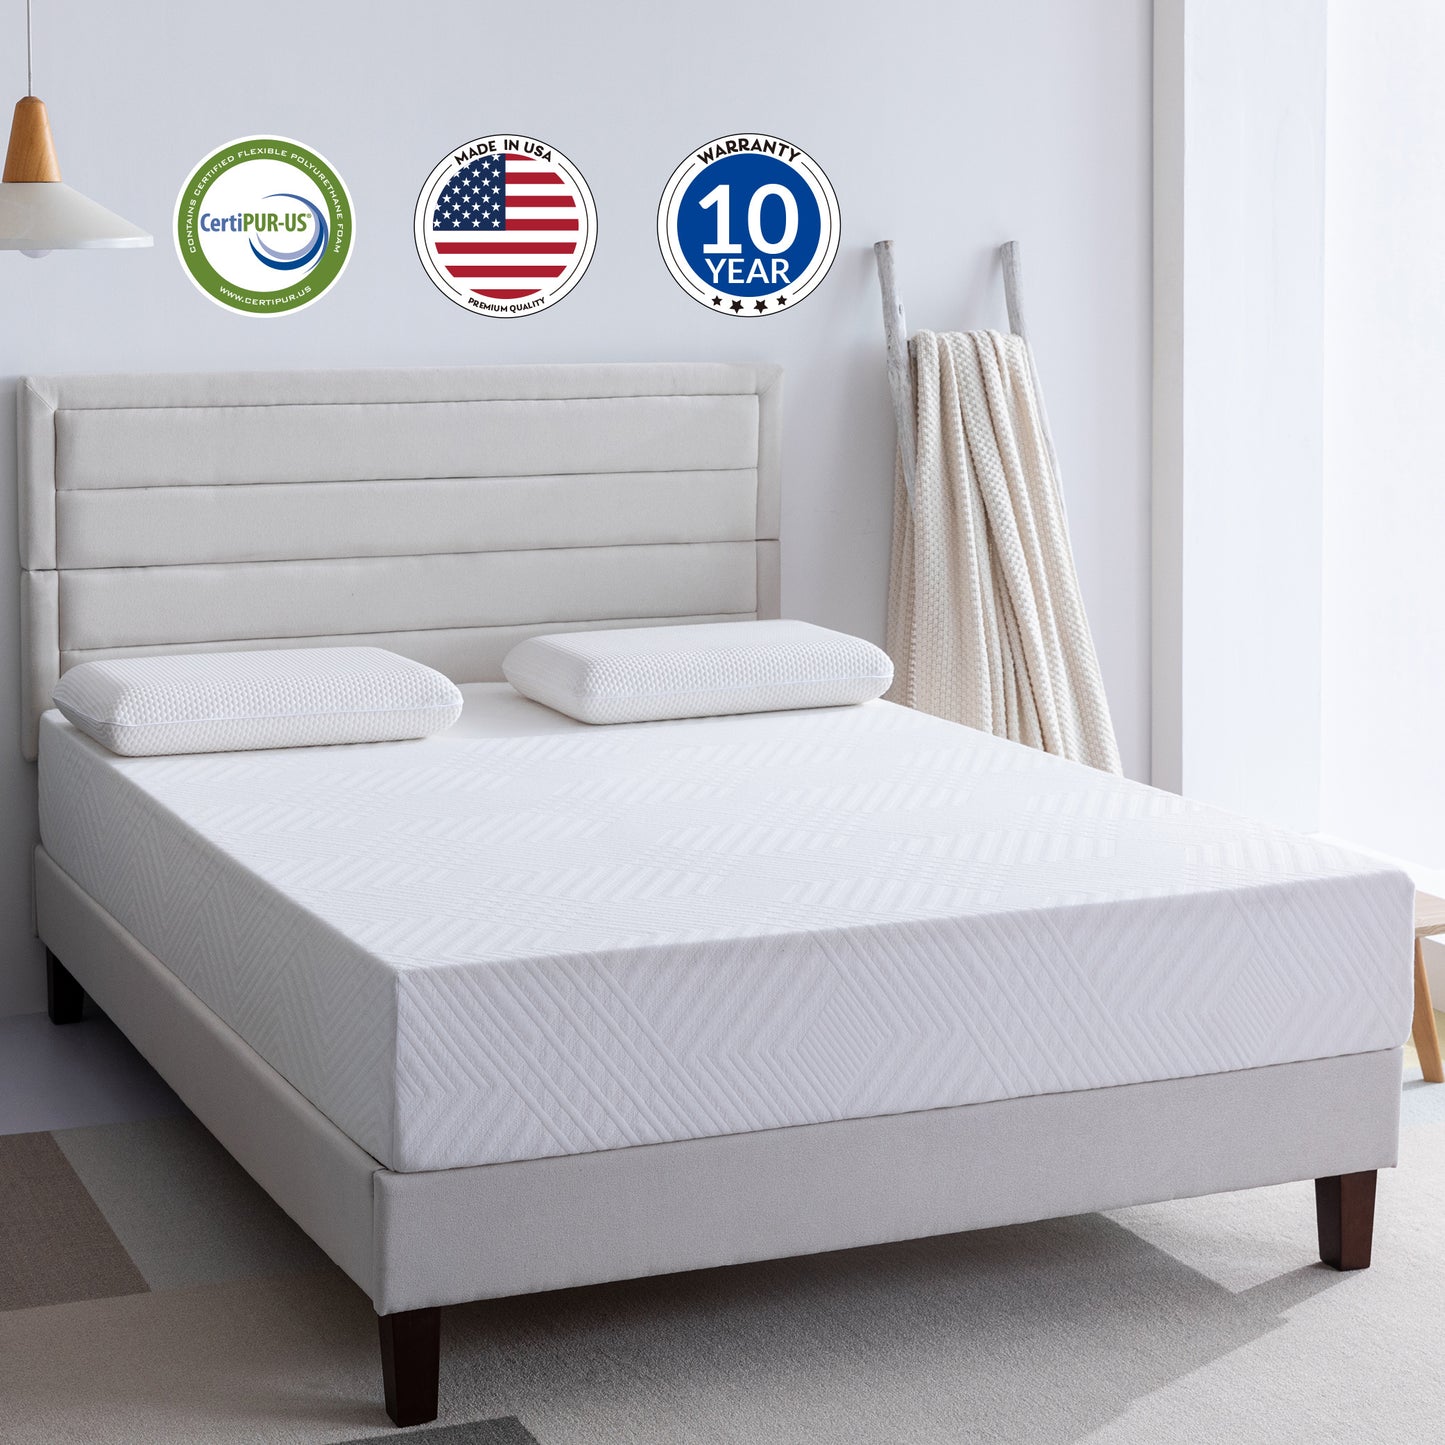 10" Memory Foam Mattress for a Cool Sleep Green Tea Infused  CertiPUR-US Certified Made in USA - Queen